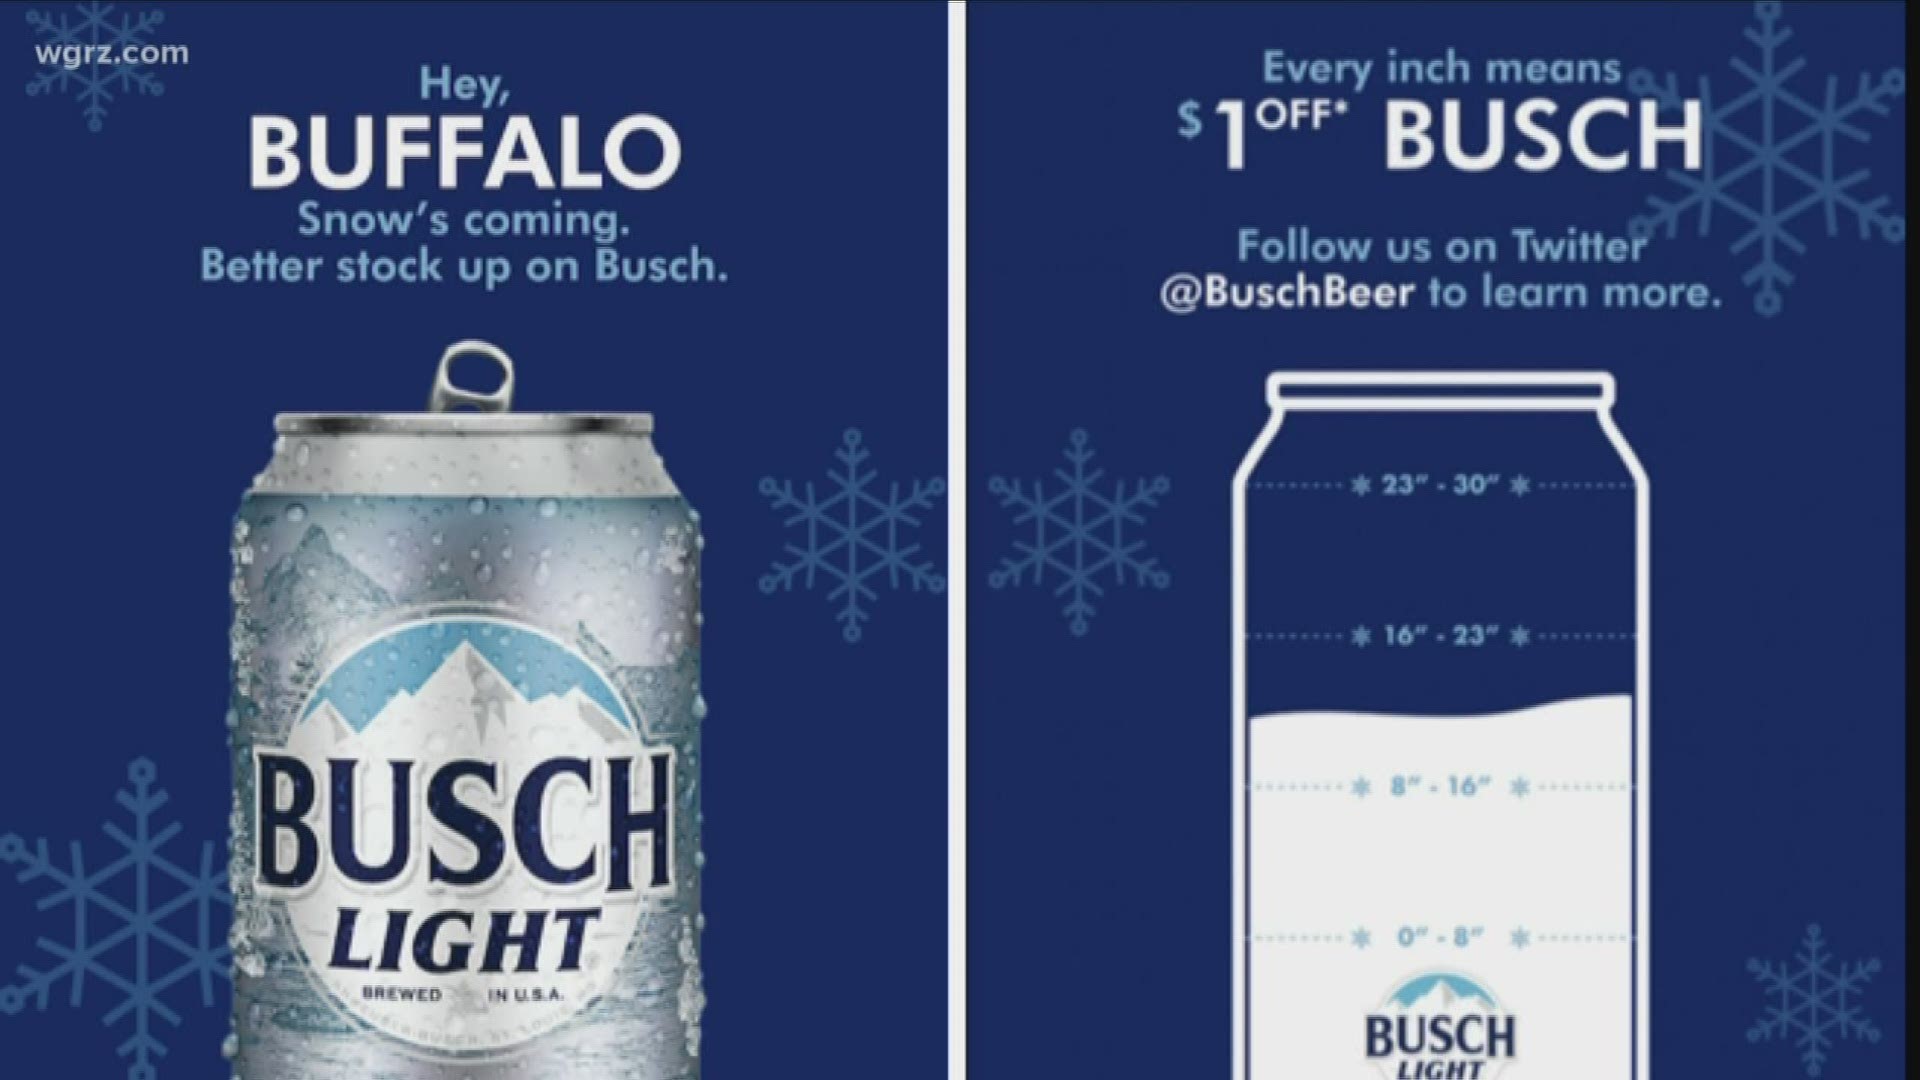 Busch beer offers $1 off for every inch of snow